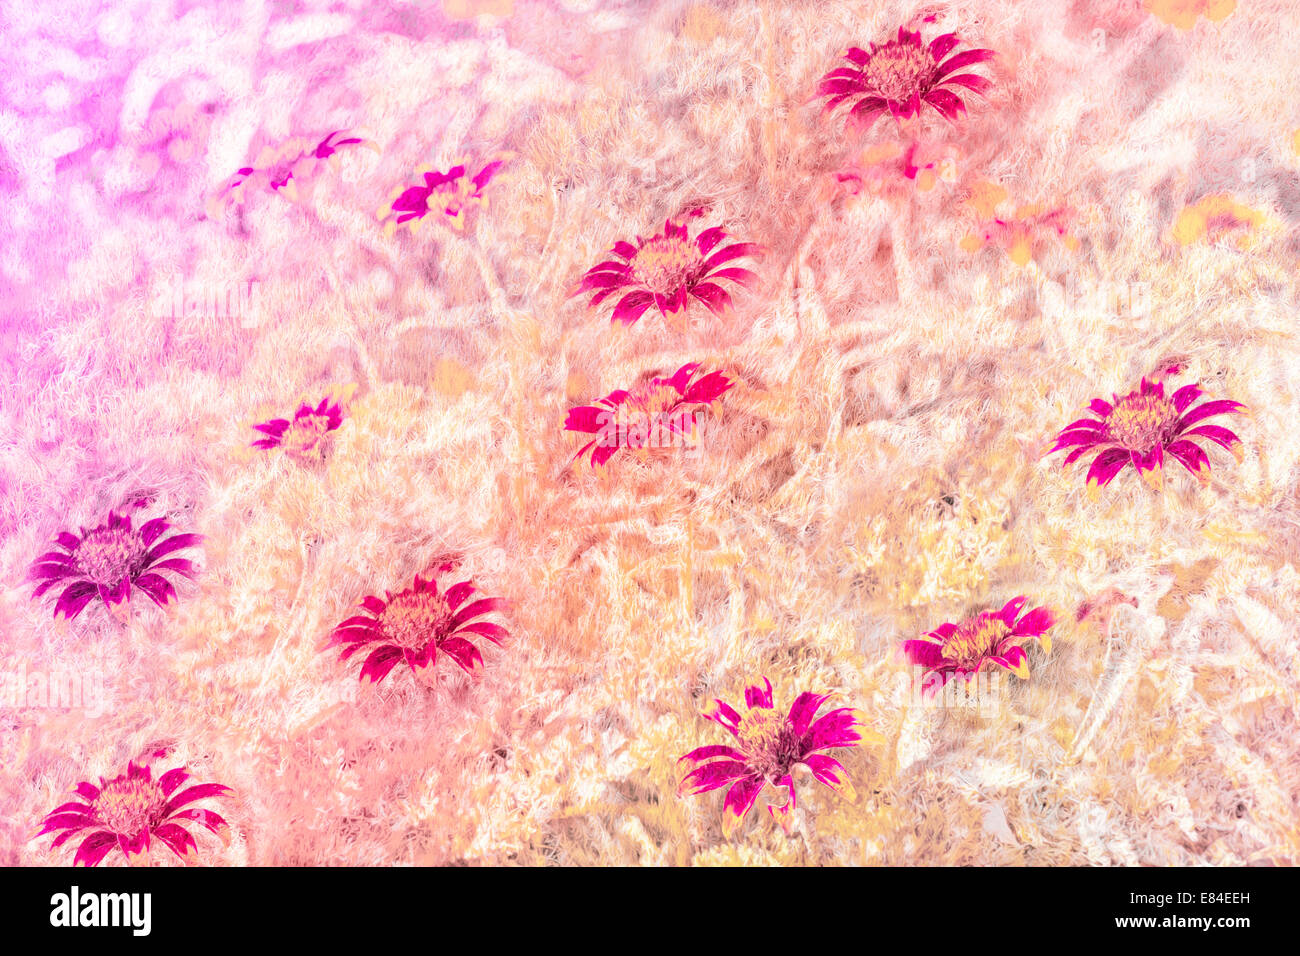 Abstract flower stylized background with grass texture. Stock Photo